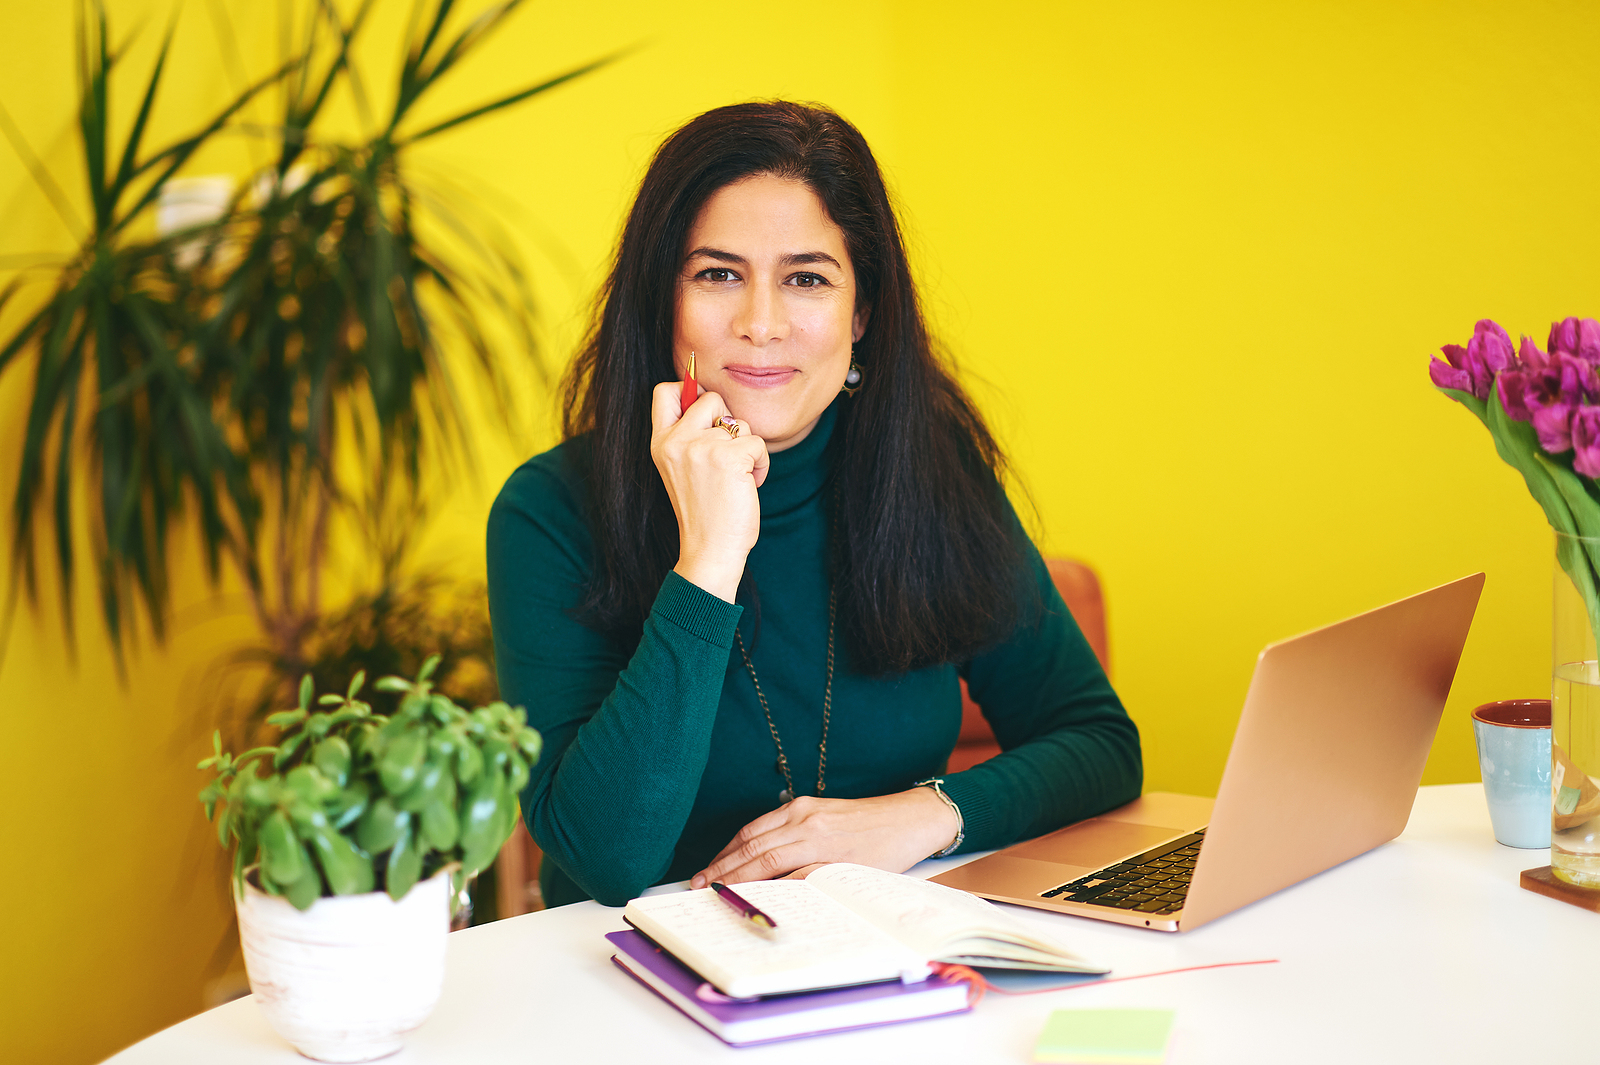 dietitian sitting at desk in yellow office with a pen in her hand